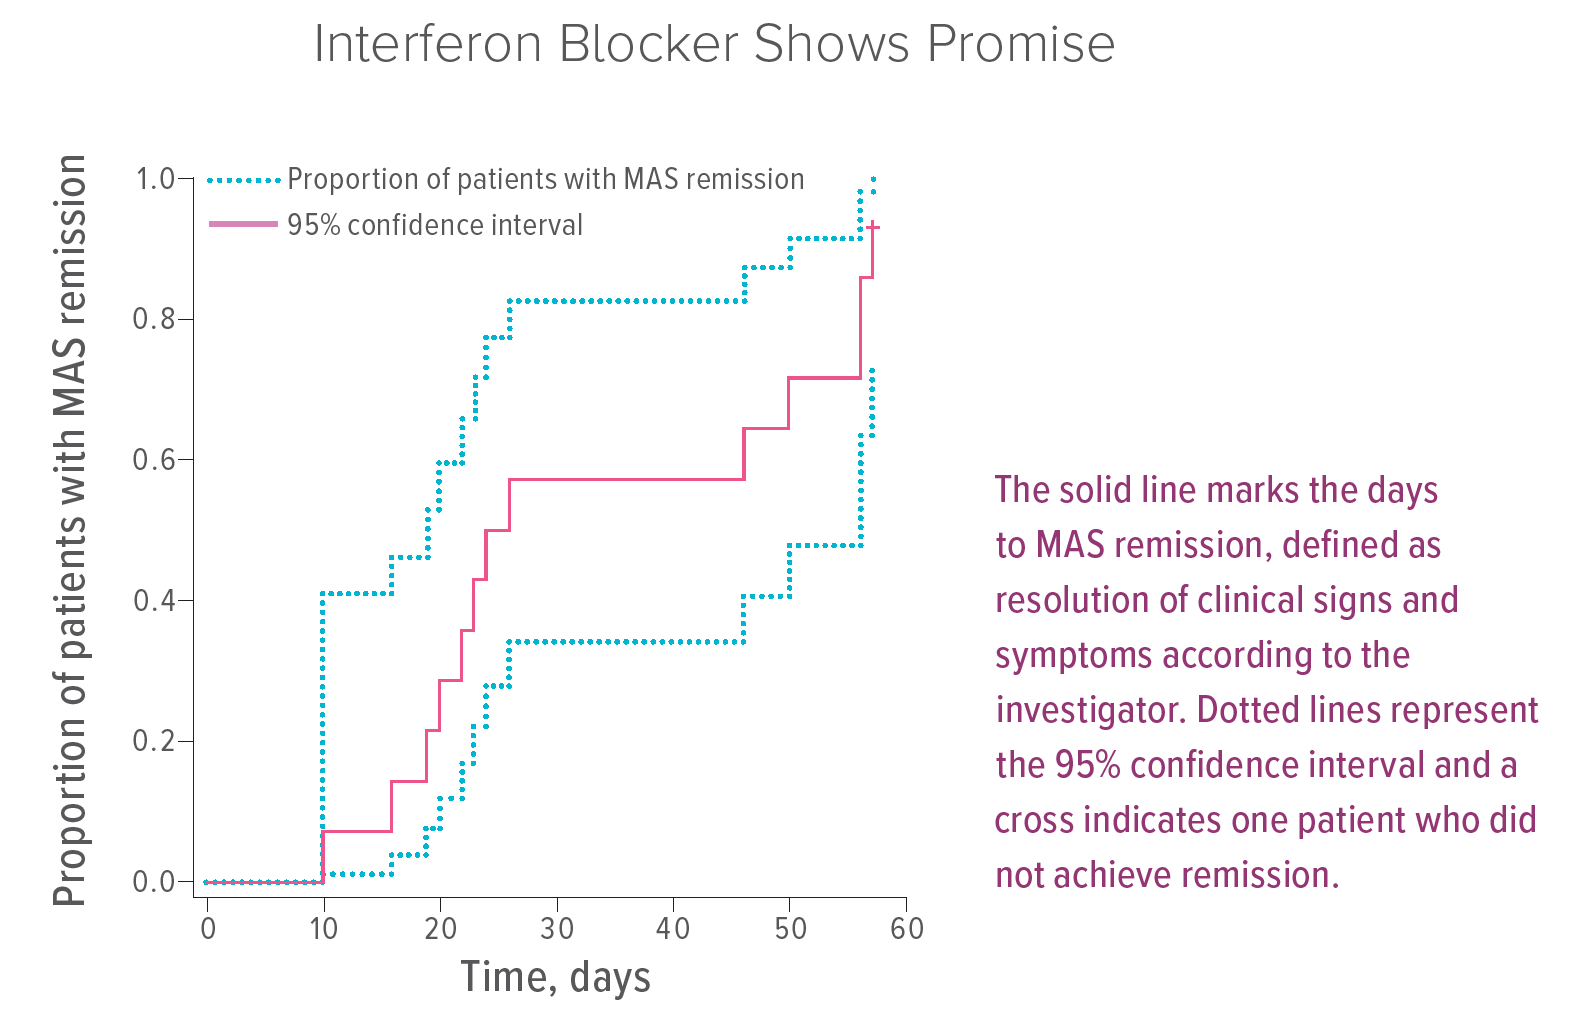 The solid line marks the days to MAS remission, defined as resolution of clinical signs and symptoms according to the investigator. Dotted lines represent the 95% confidence interval and a cross indicates one patient who did not achieve remission.